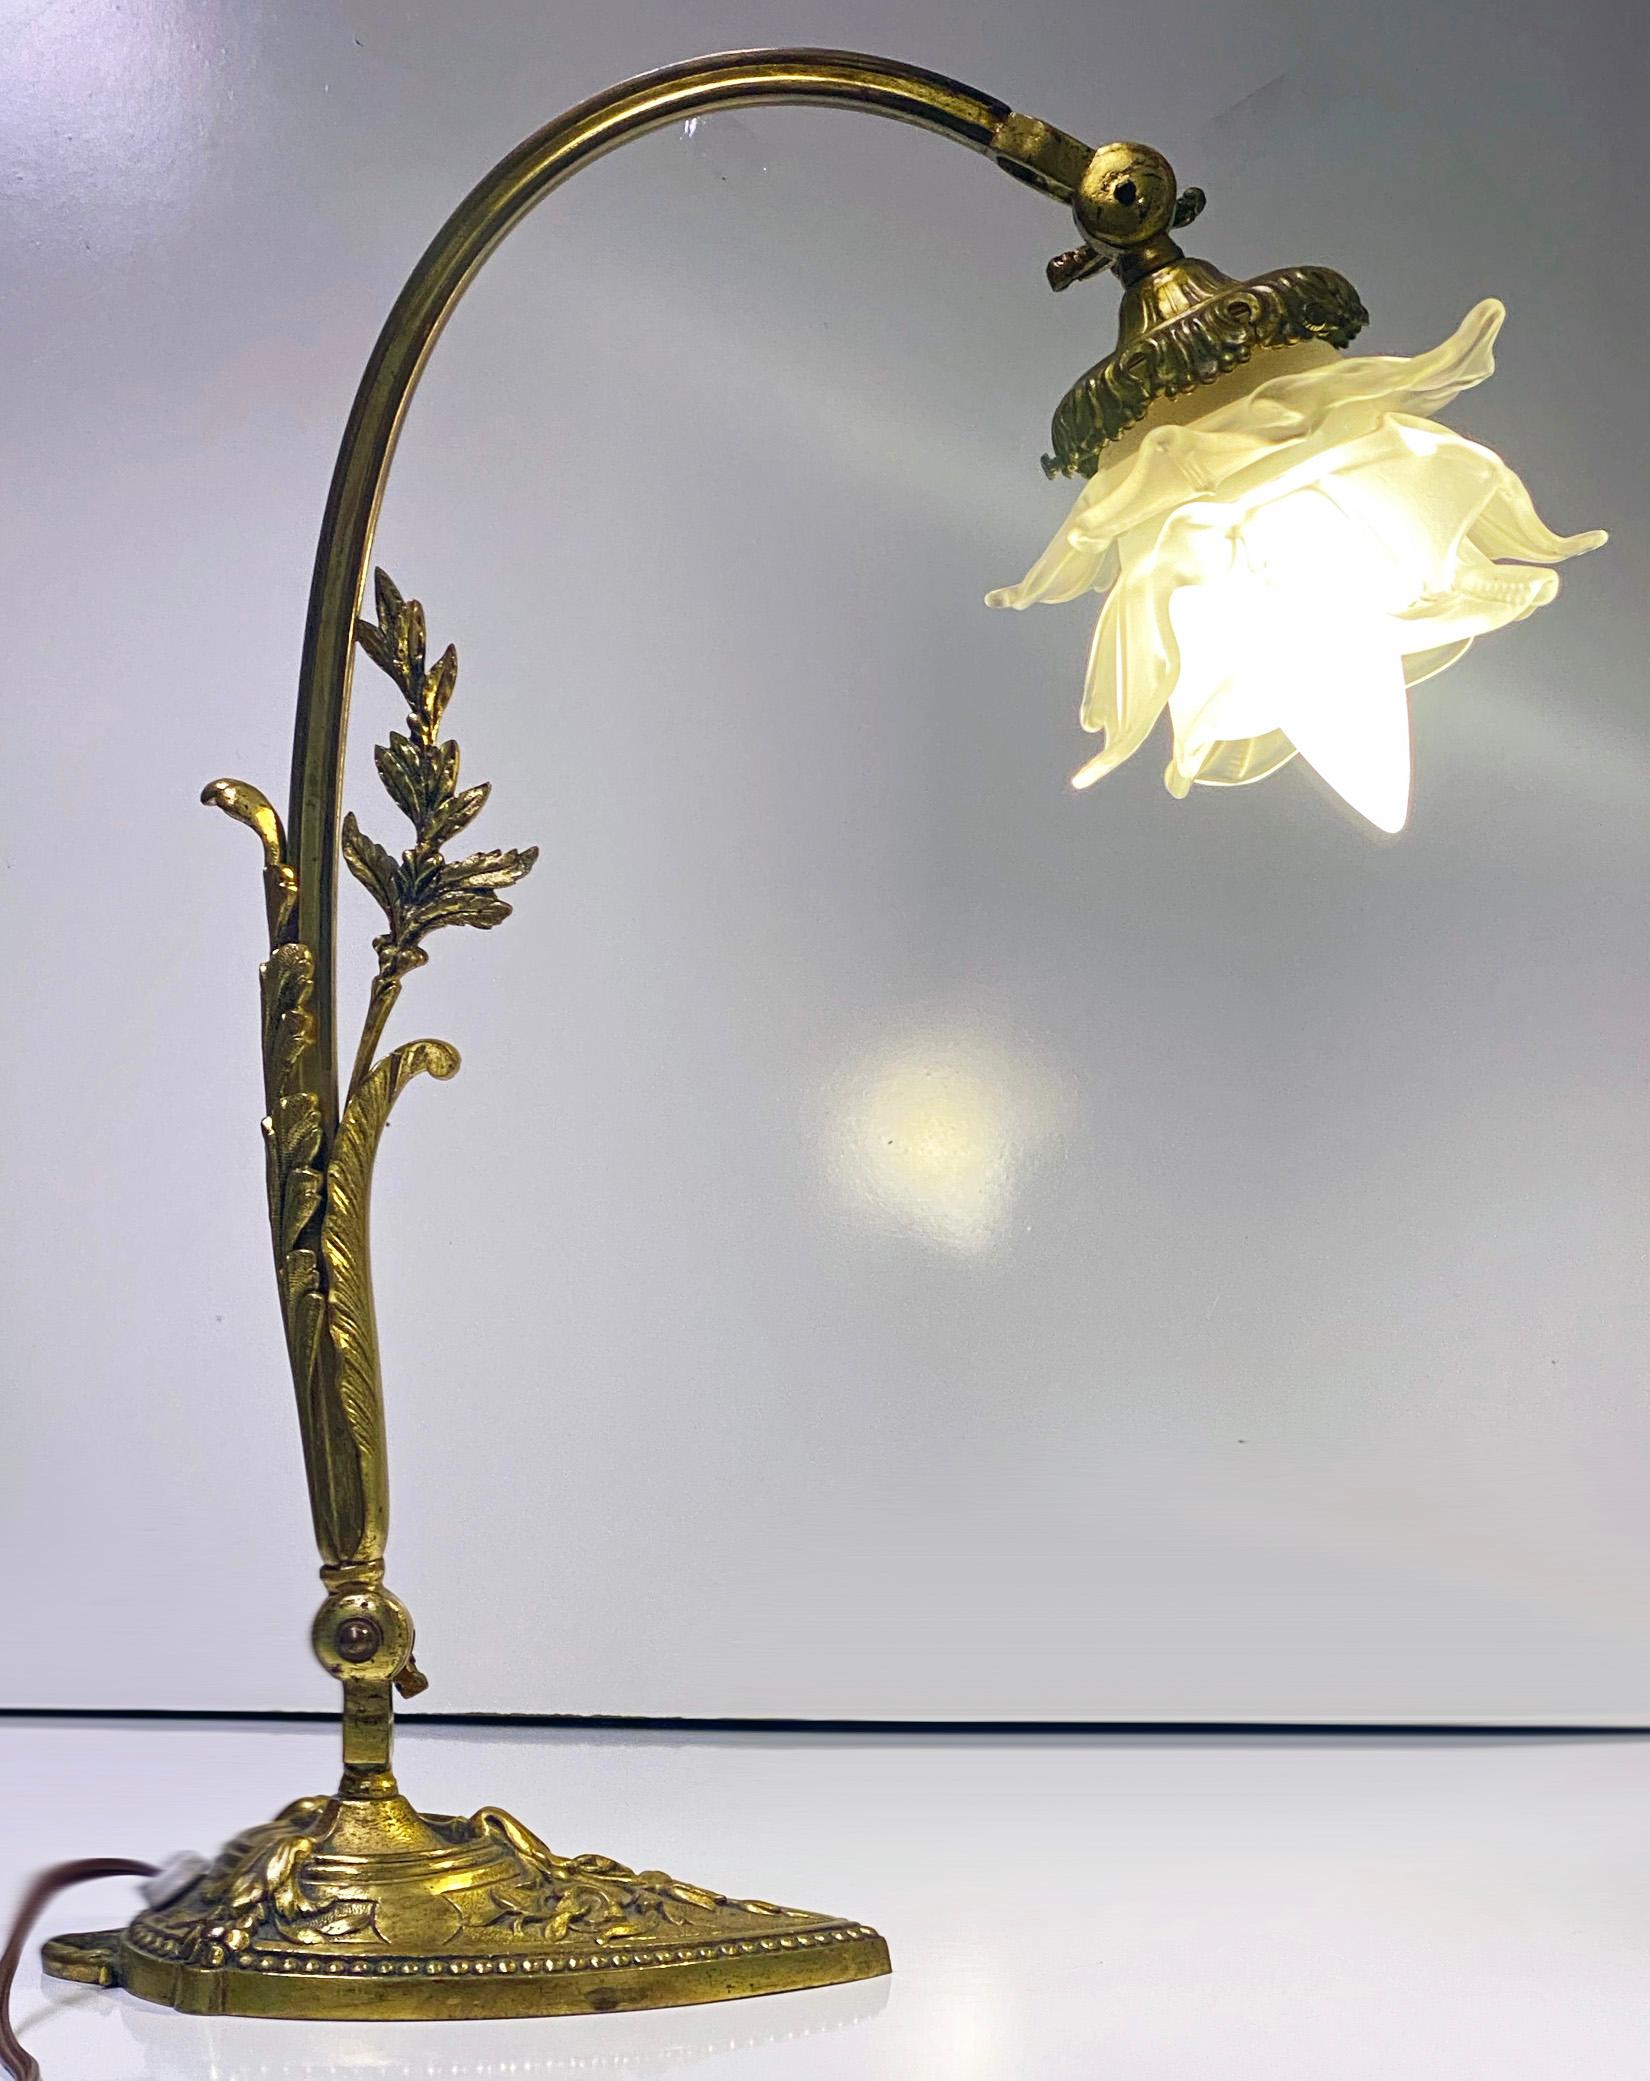 French Art Nouveau table desk lamp, circa 1920. The gooseneck bronze stand with applied foliage floral decoration, supporting a delicate, frosted white rose petal glass shade, adjustable neck and base. Measure: Height 16.5 inches.